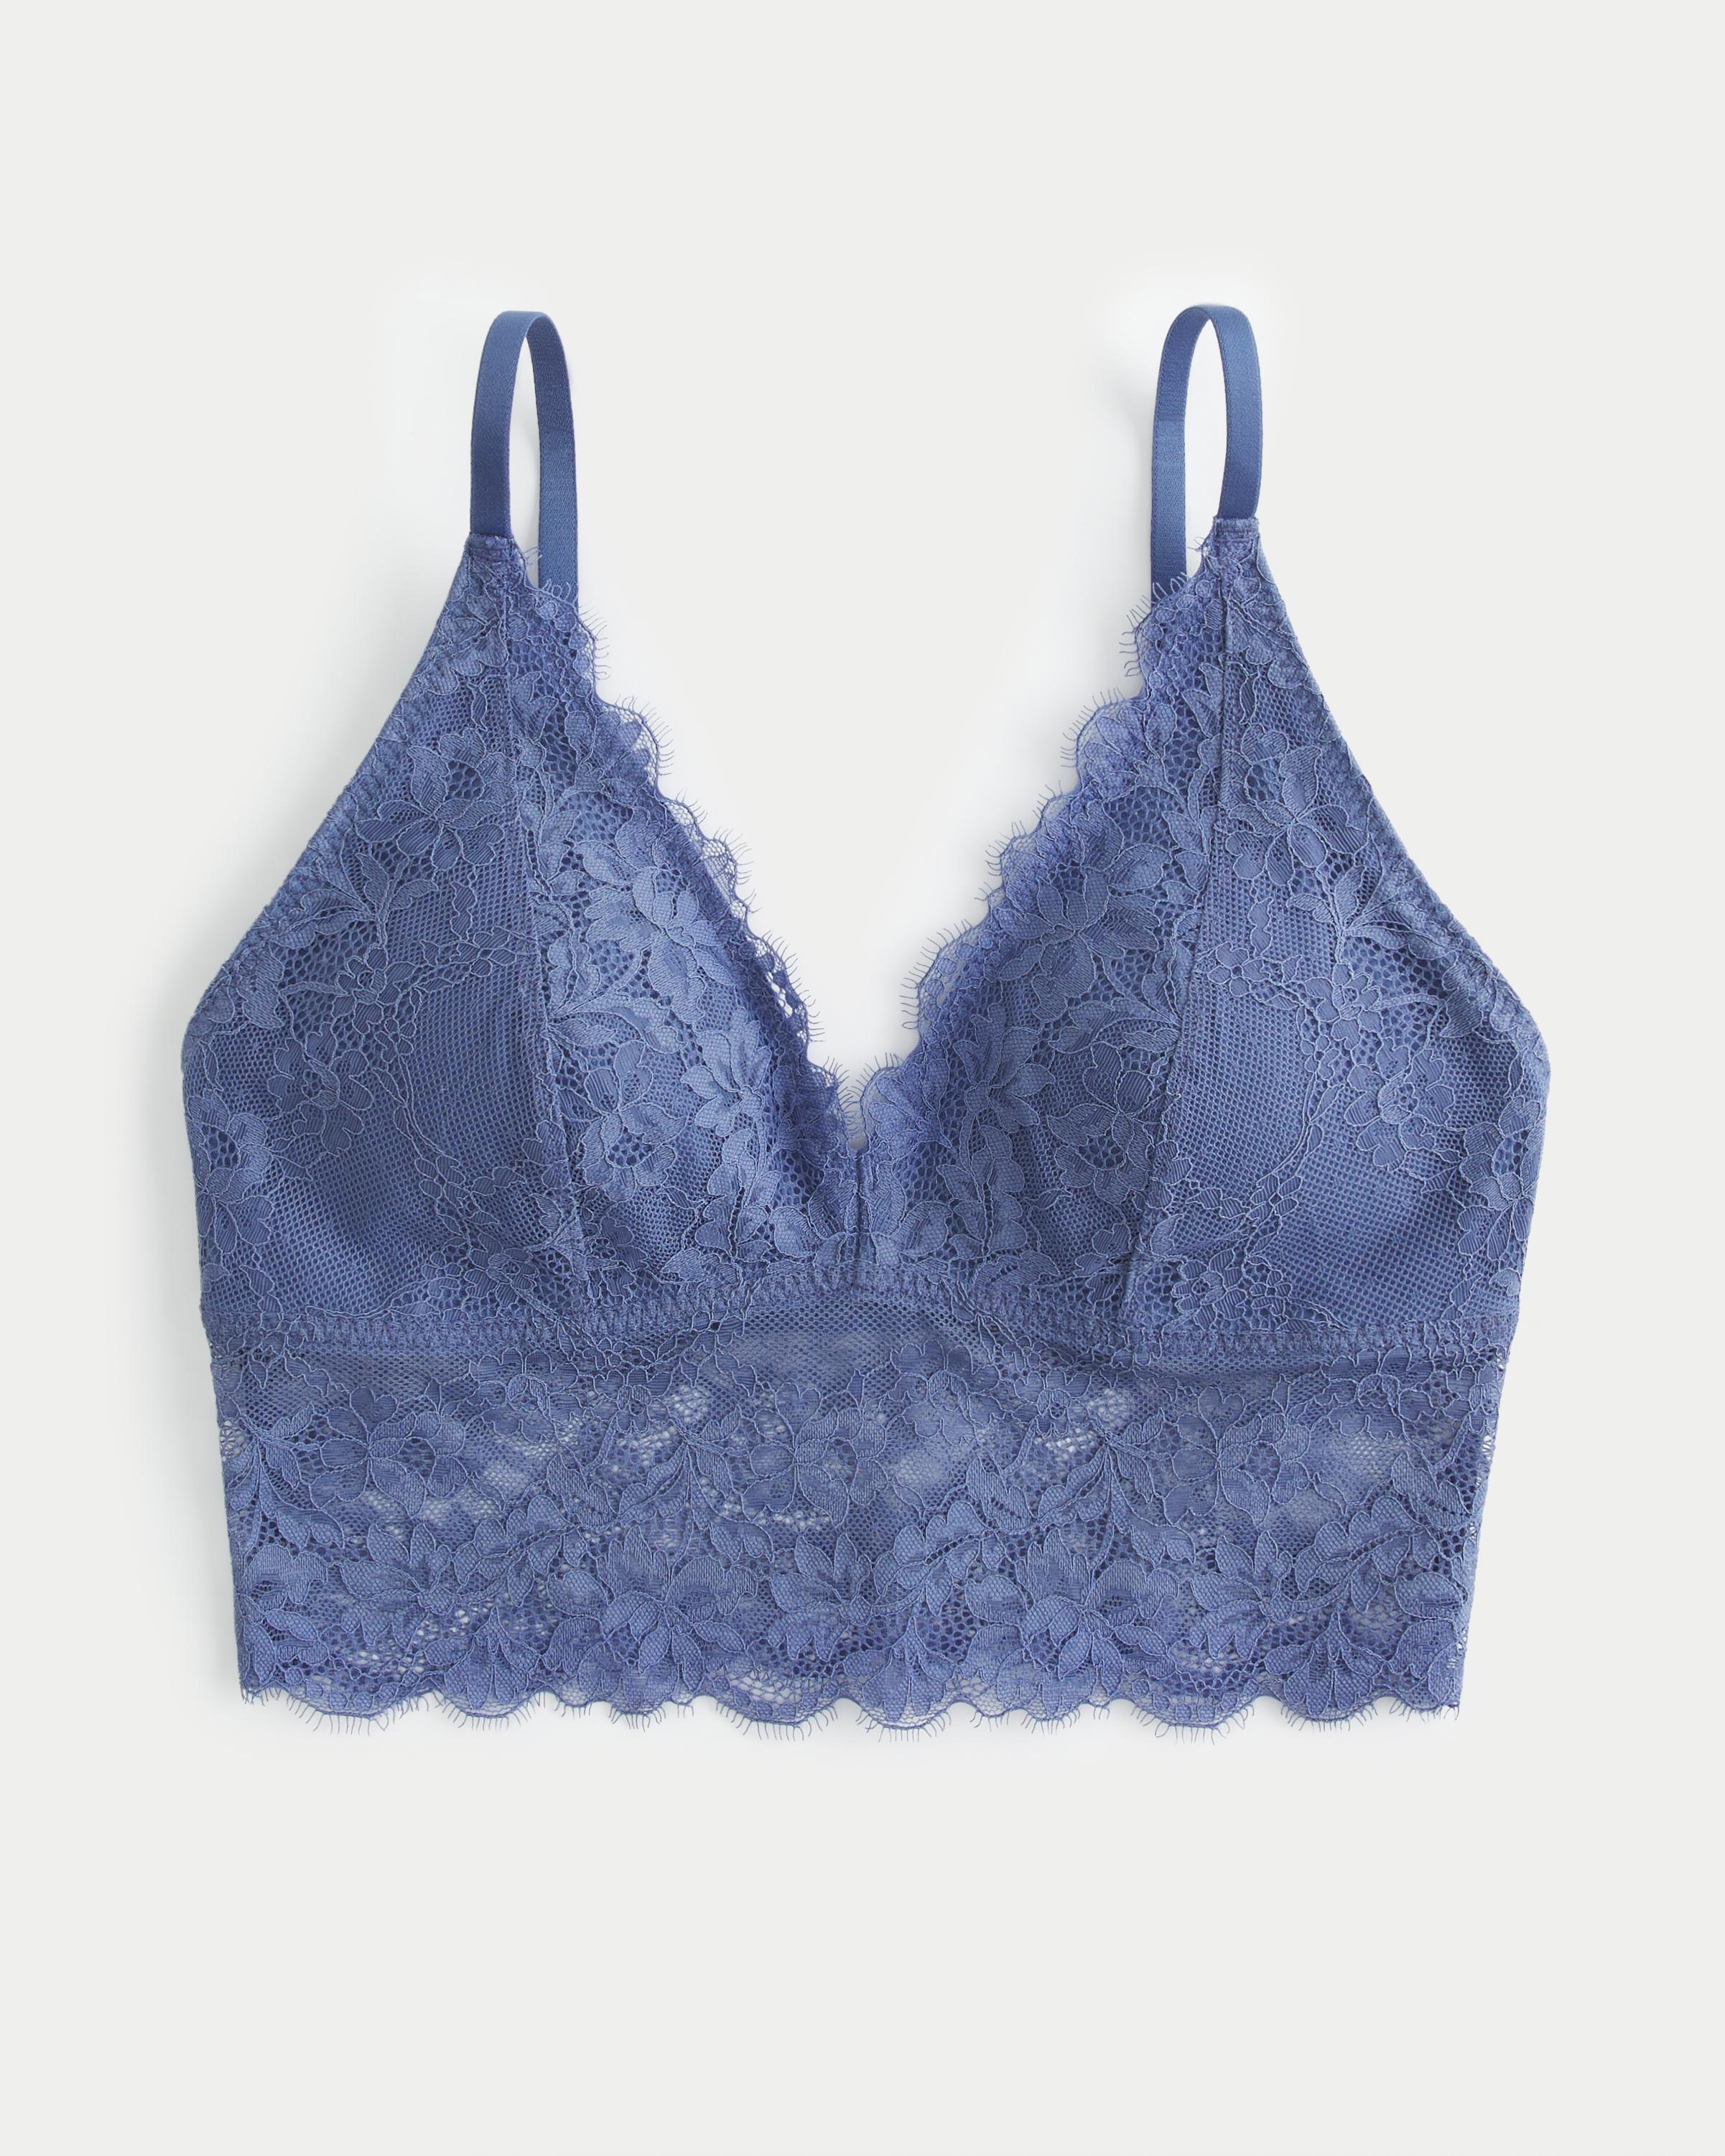 Hollister Gilly Hicks Lace Bustier